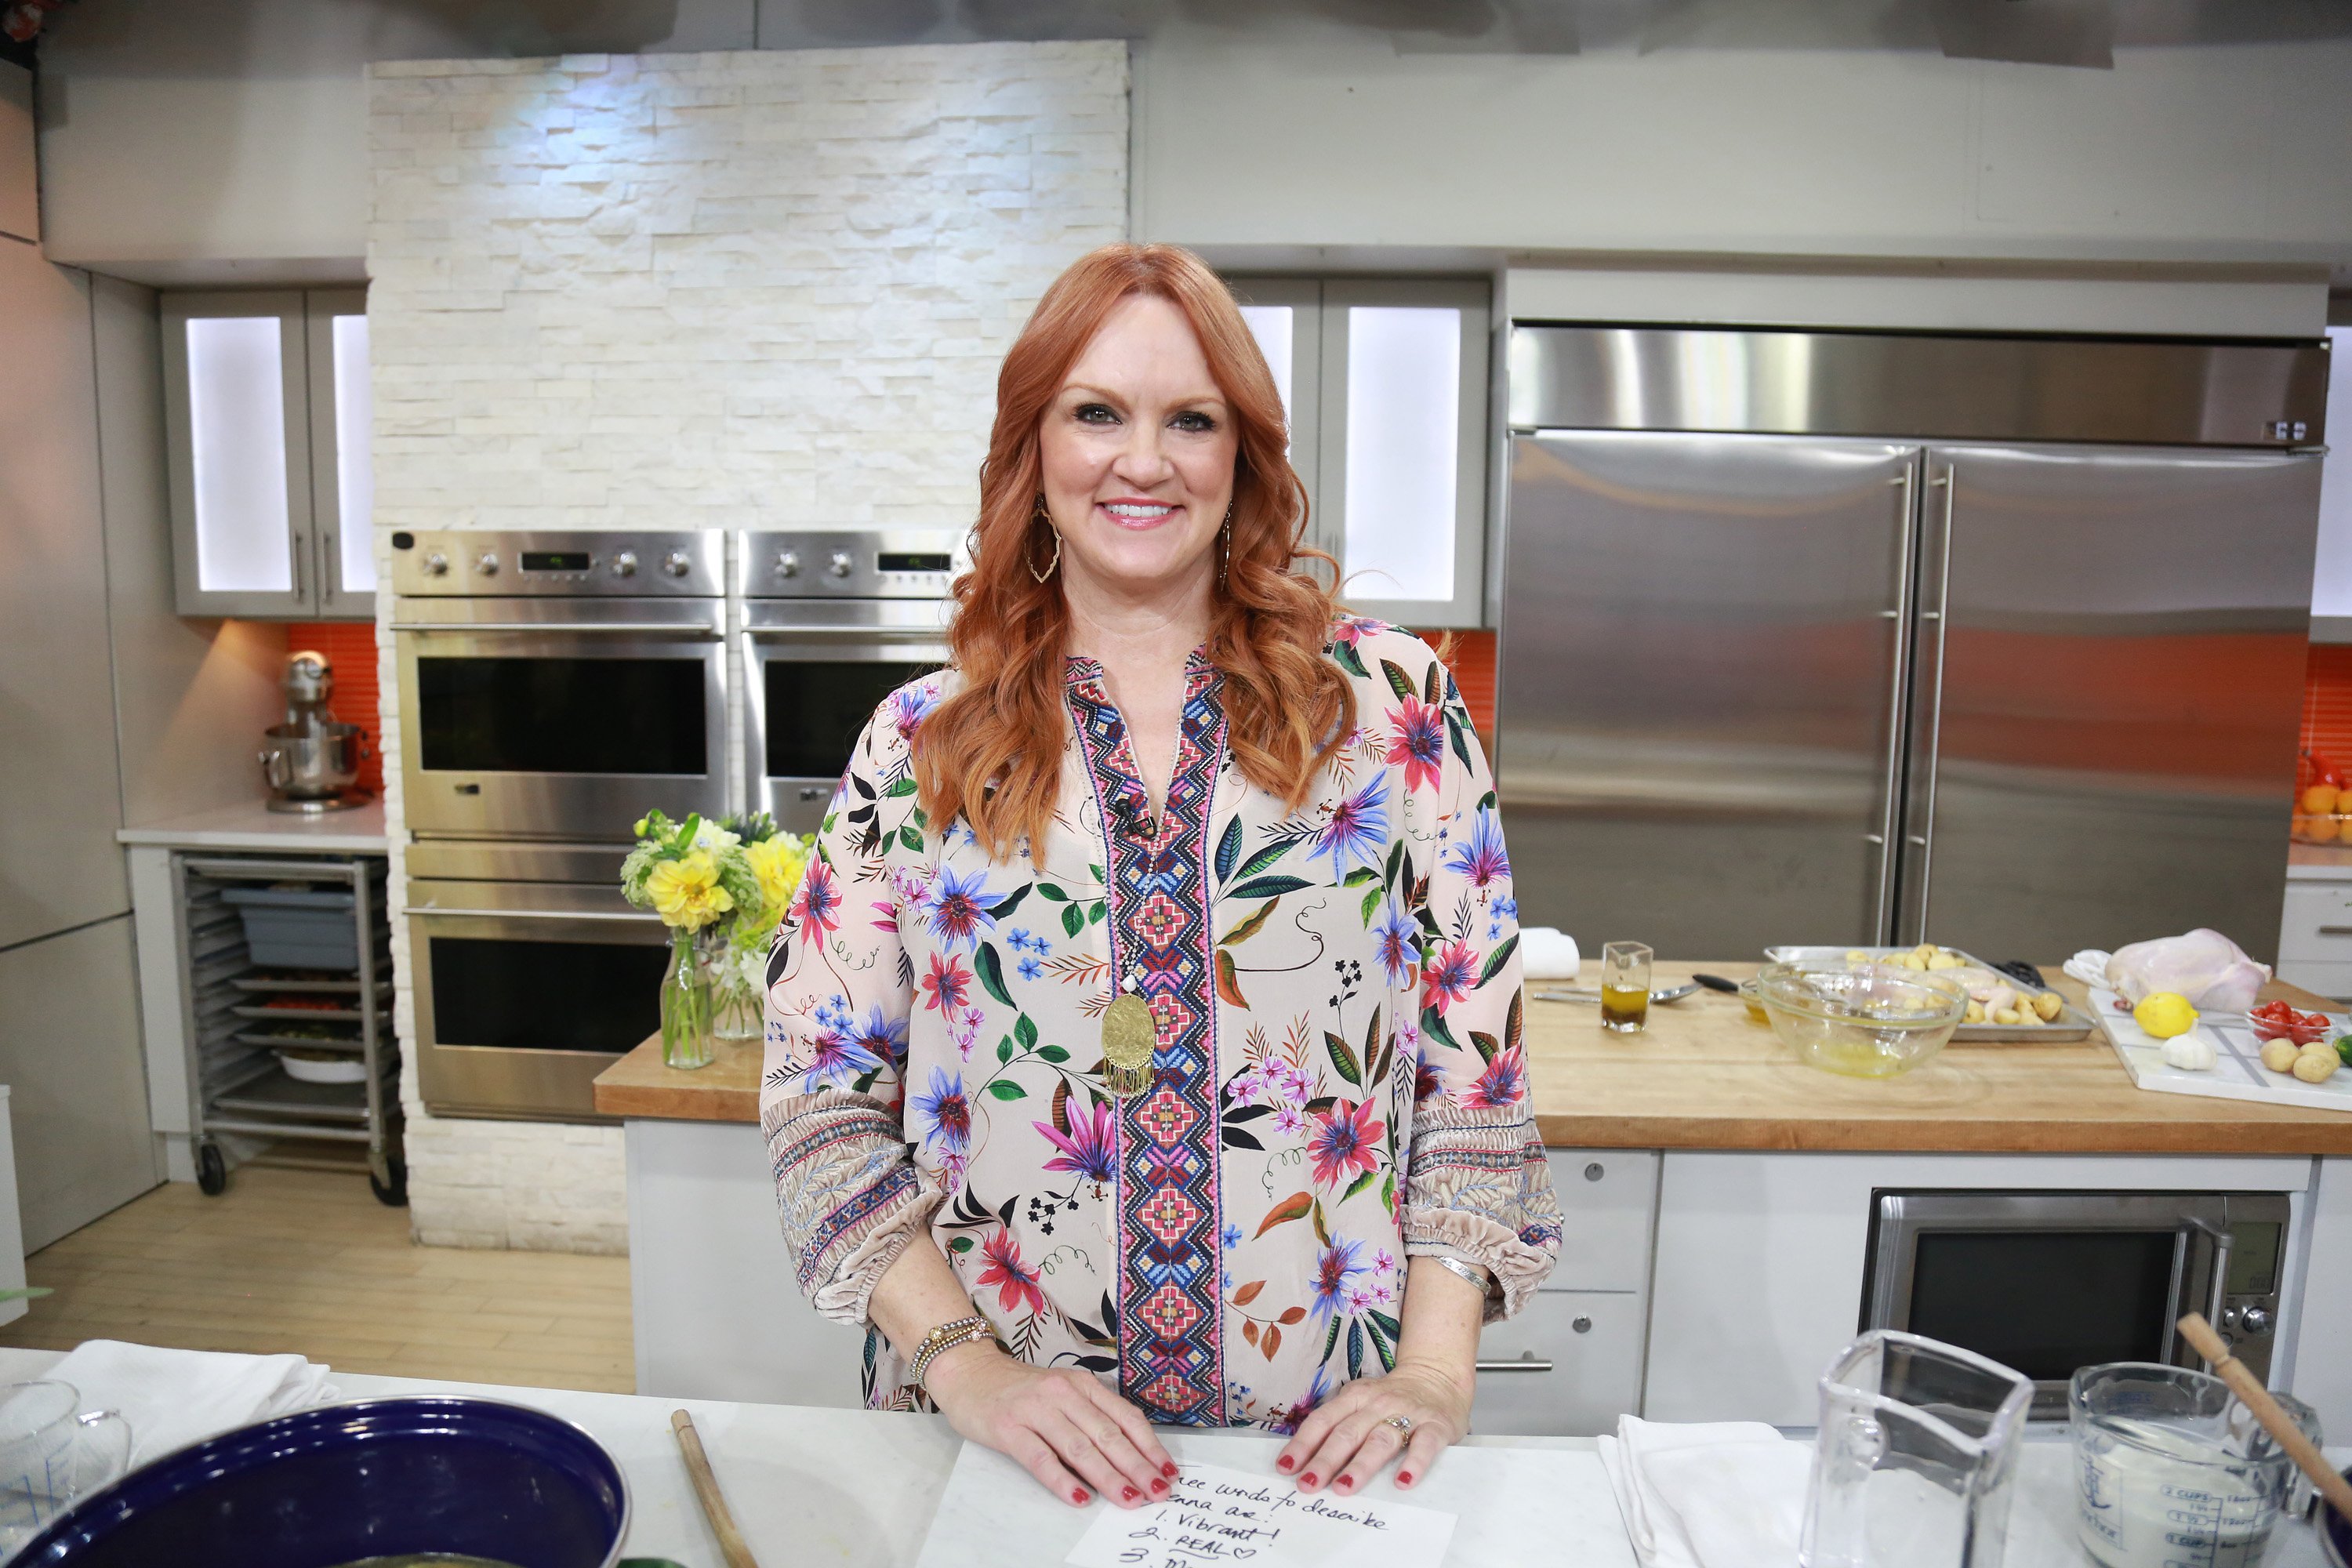 The Pioneer Woman Ree Drummond on the Today show.